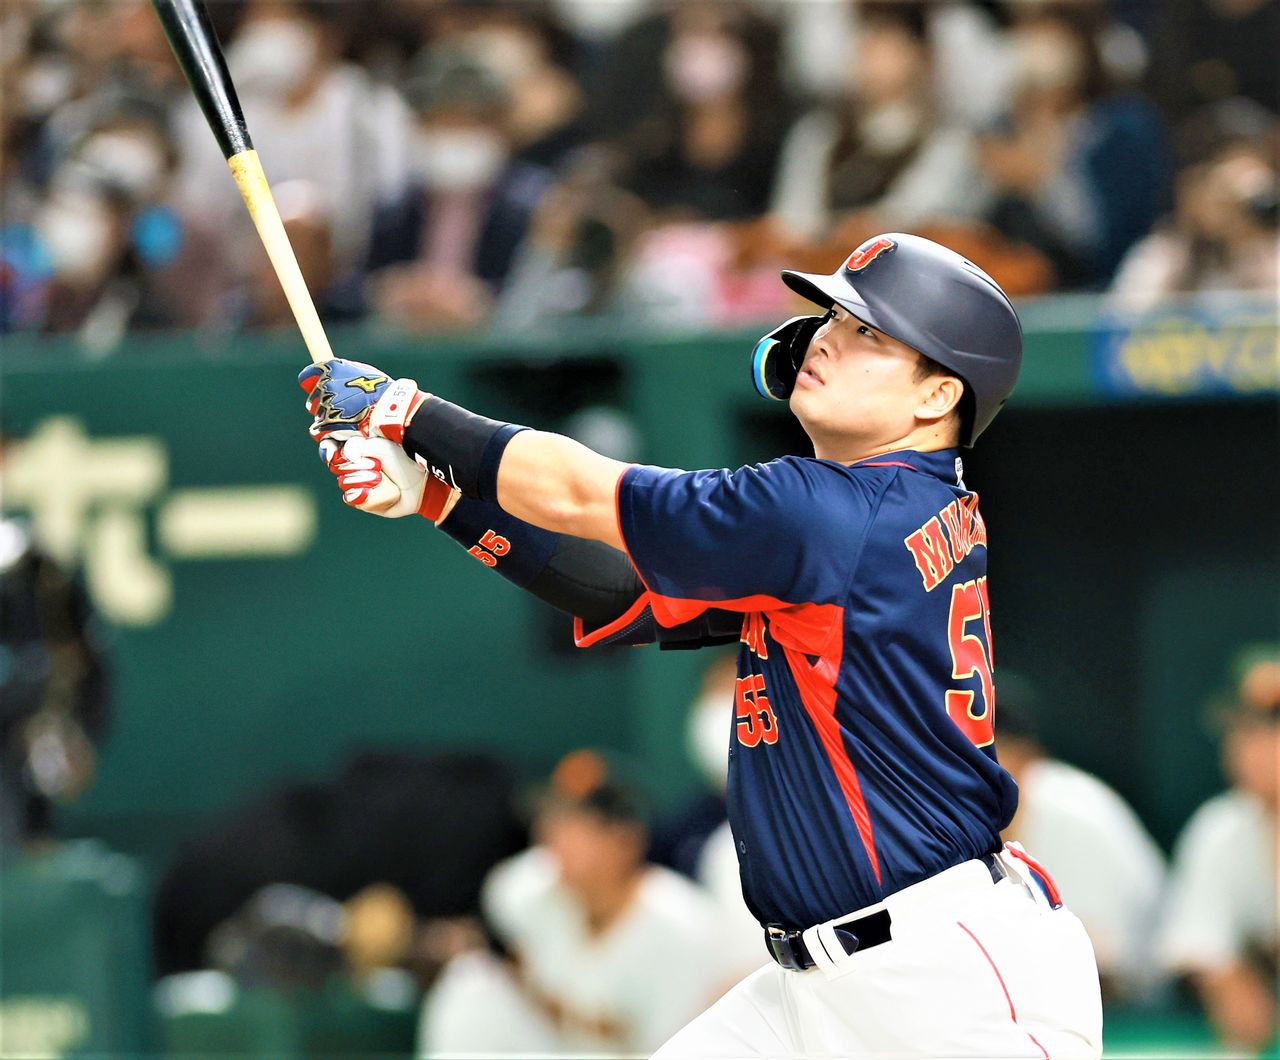 Murakami Munetaka (Tokyo Yakult Swallows), who in 2022 became the youngest triple crown winner, hits a home run in a friendly match against the Yomiuri Giants at Tokyo Dome on November 6, 2022. (© Jiji)